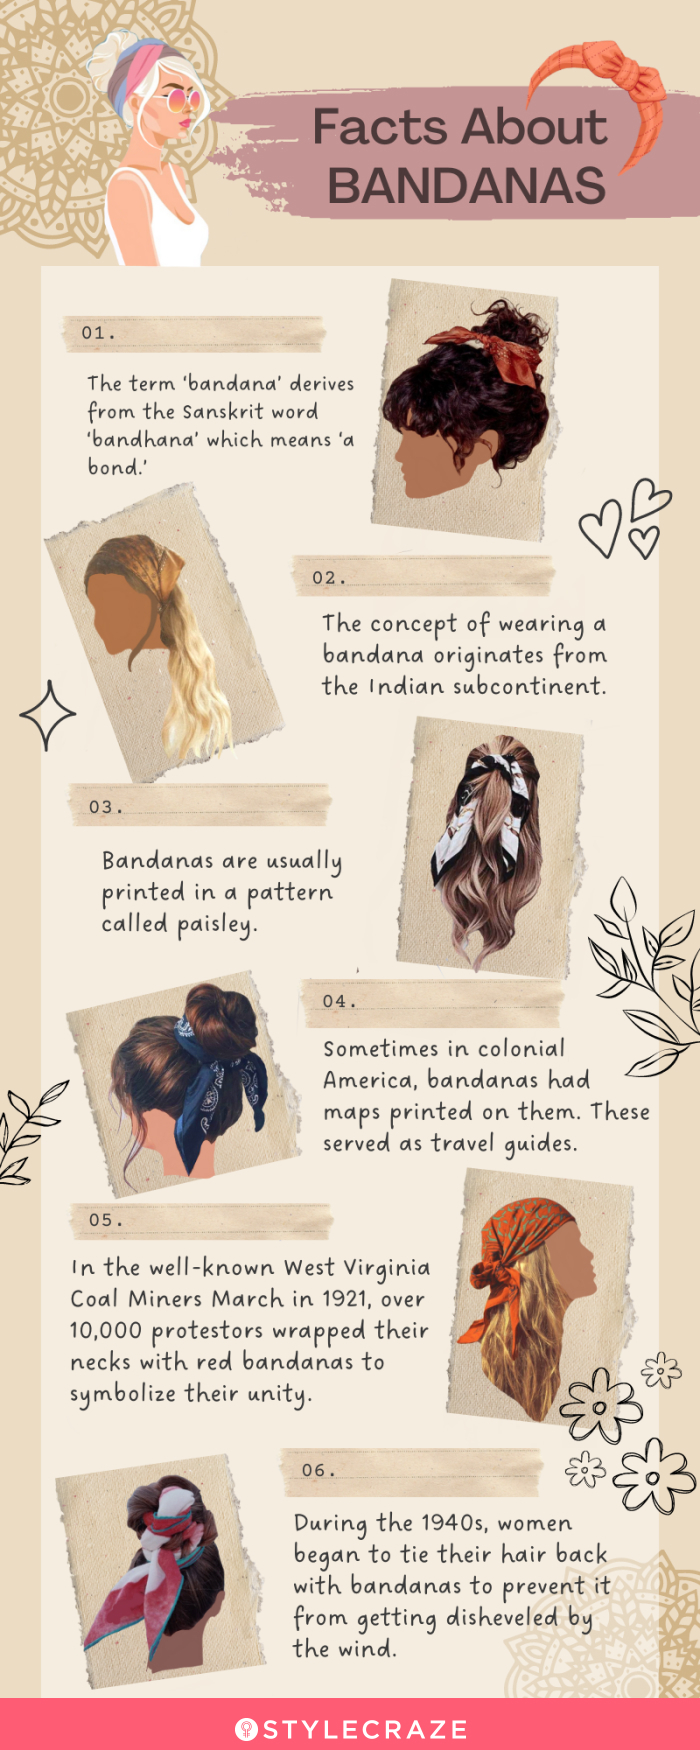 interesting facts about bandanas (infographic)